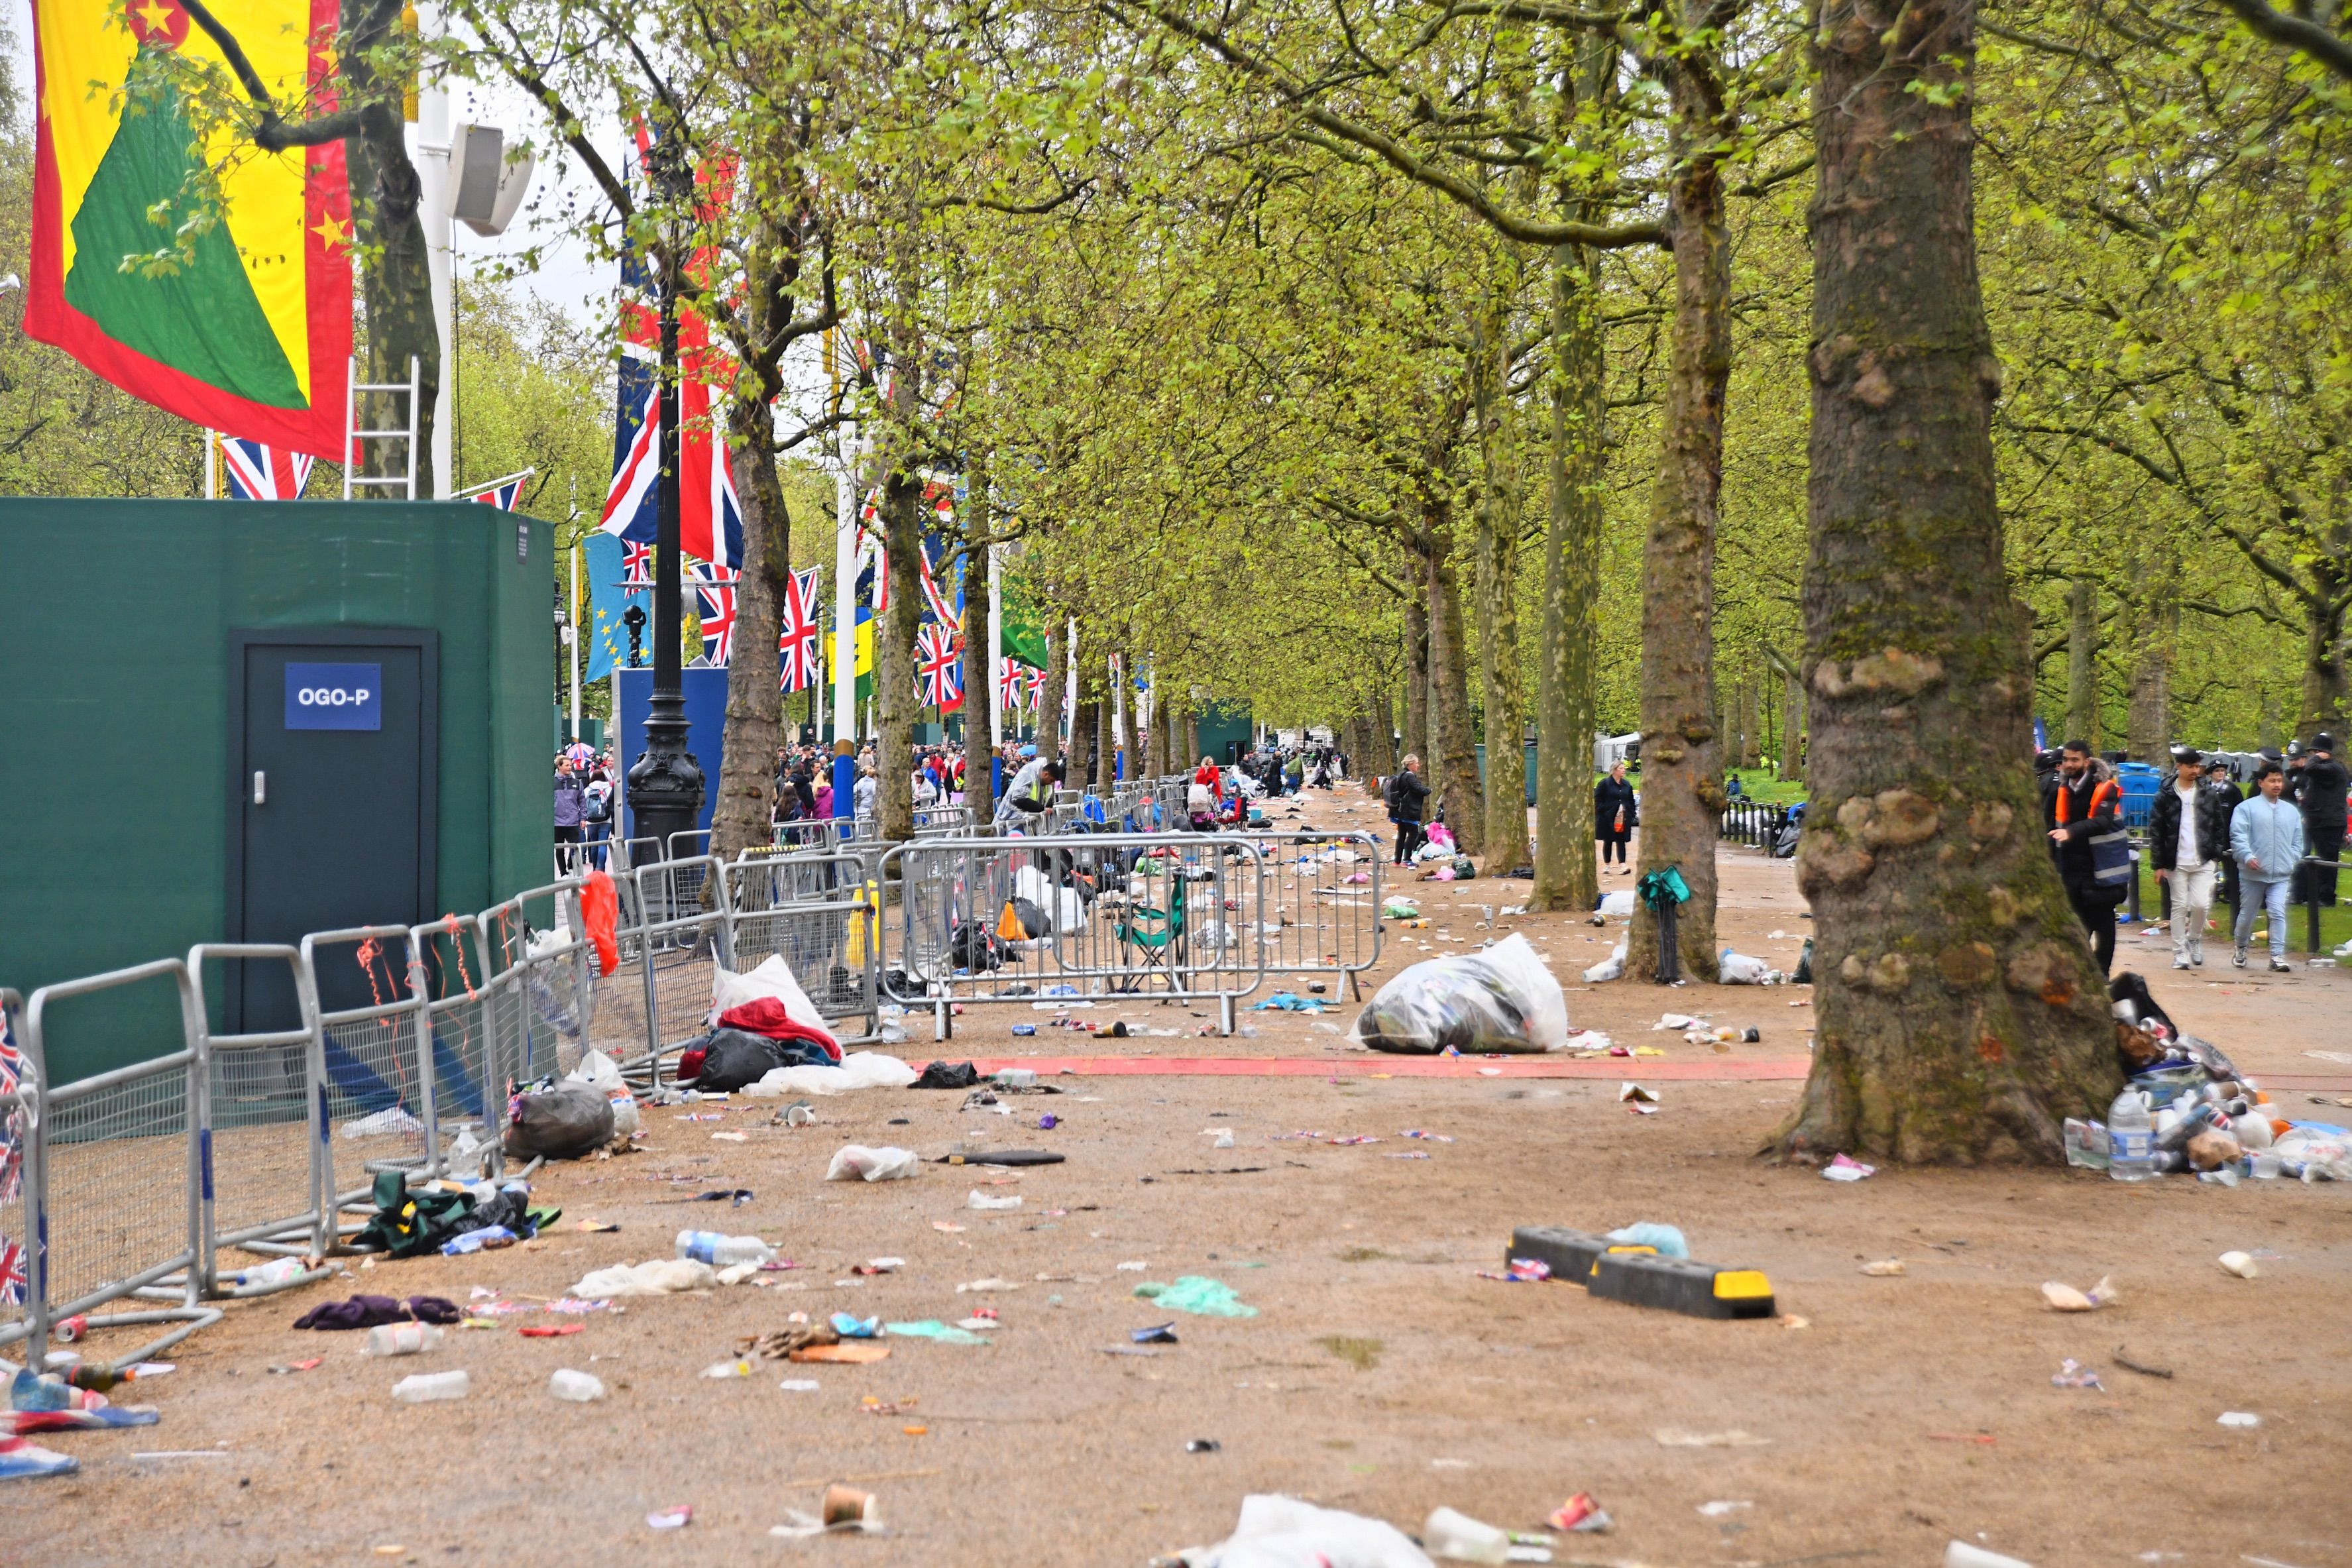 Large quantities of litter were left along The Mall after the coronation